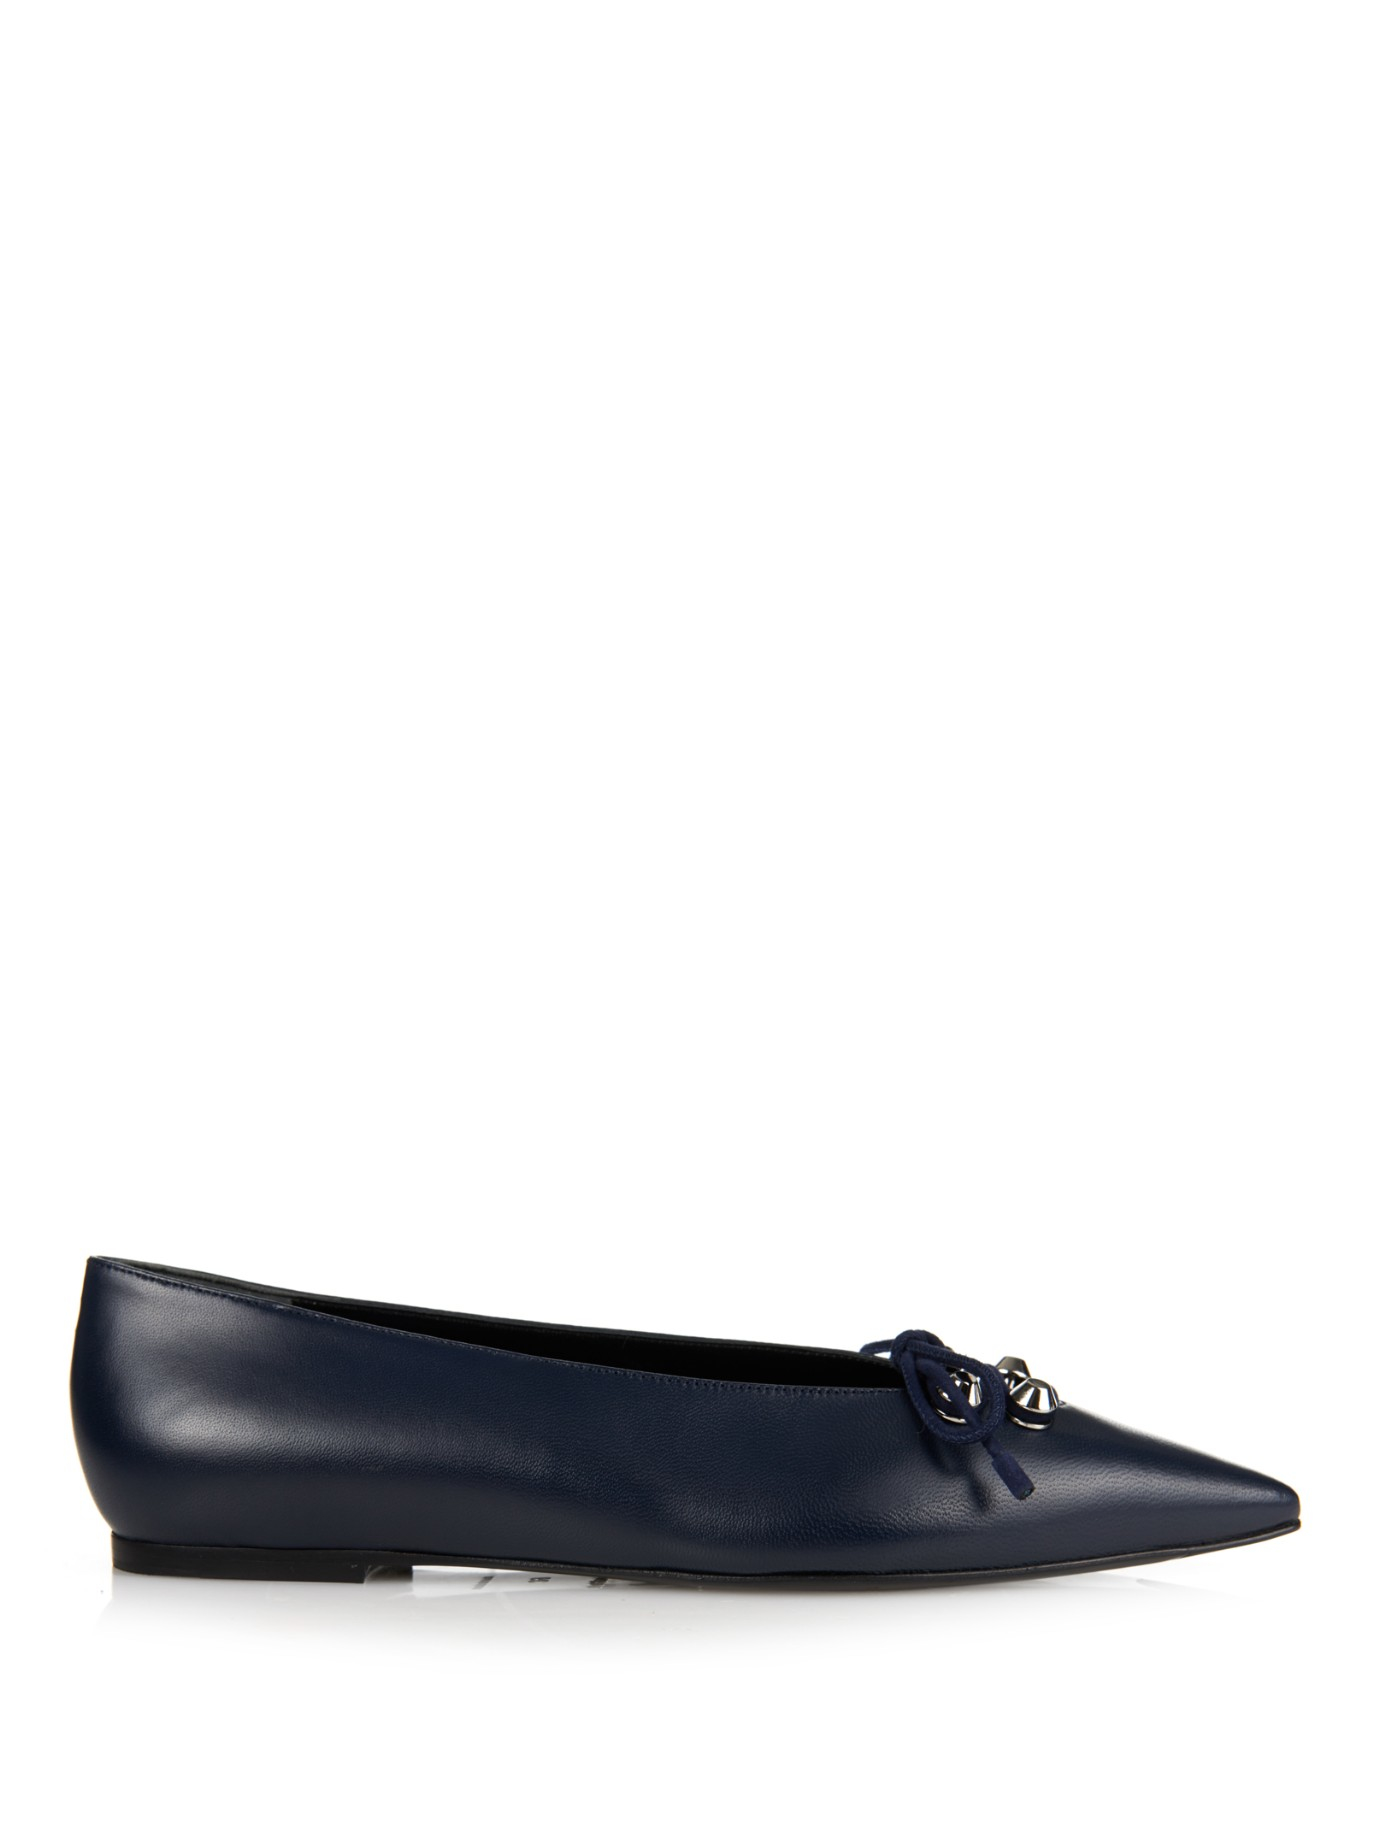 Pronounce Time Associate Balenciaga Leather Lace-Up Point Toe Flats in Navy (Blue) | Lyst